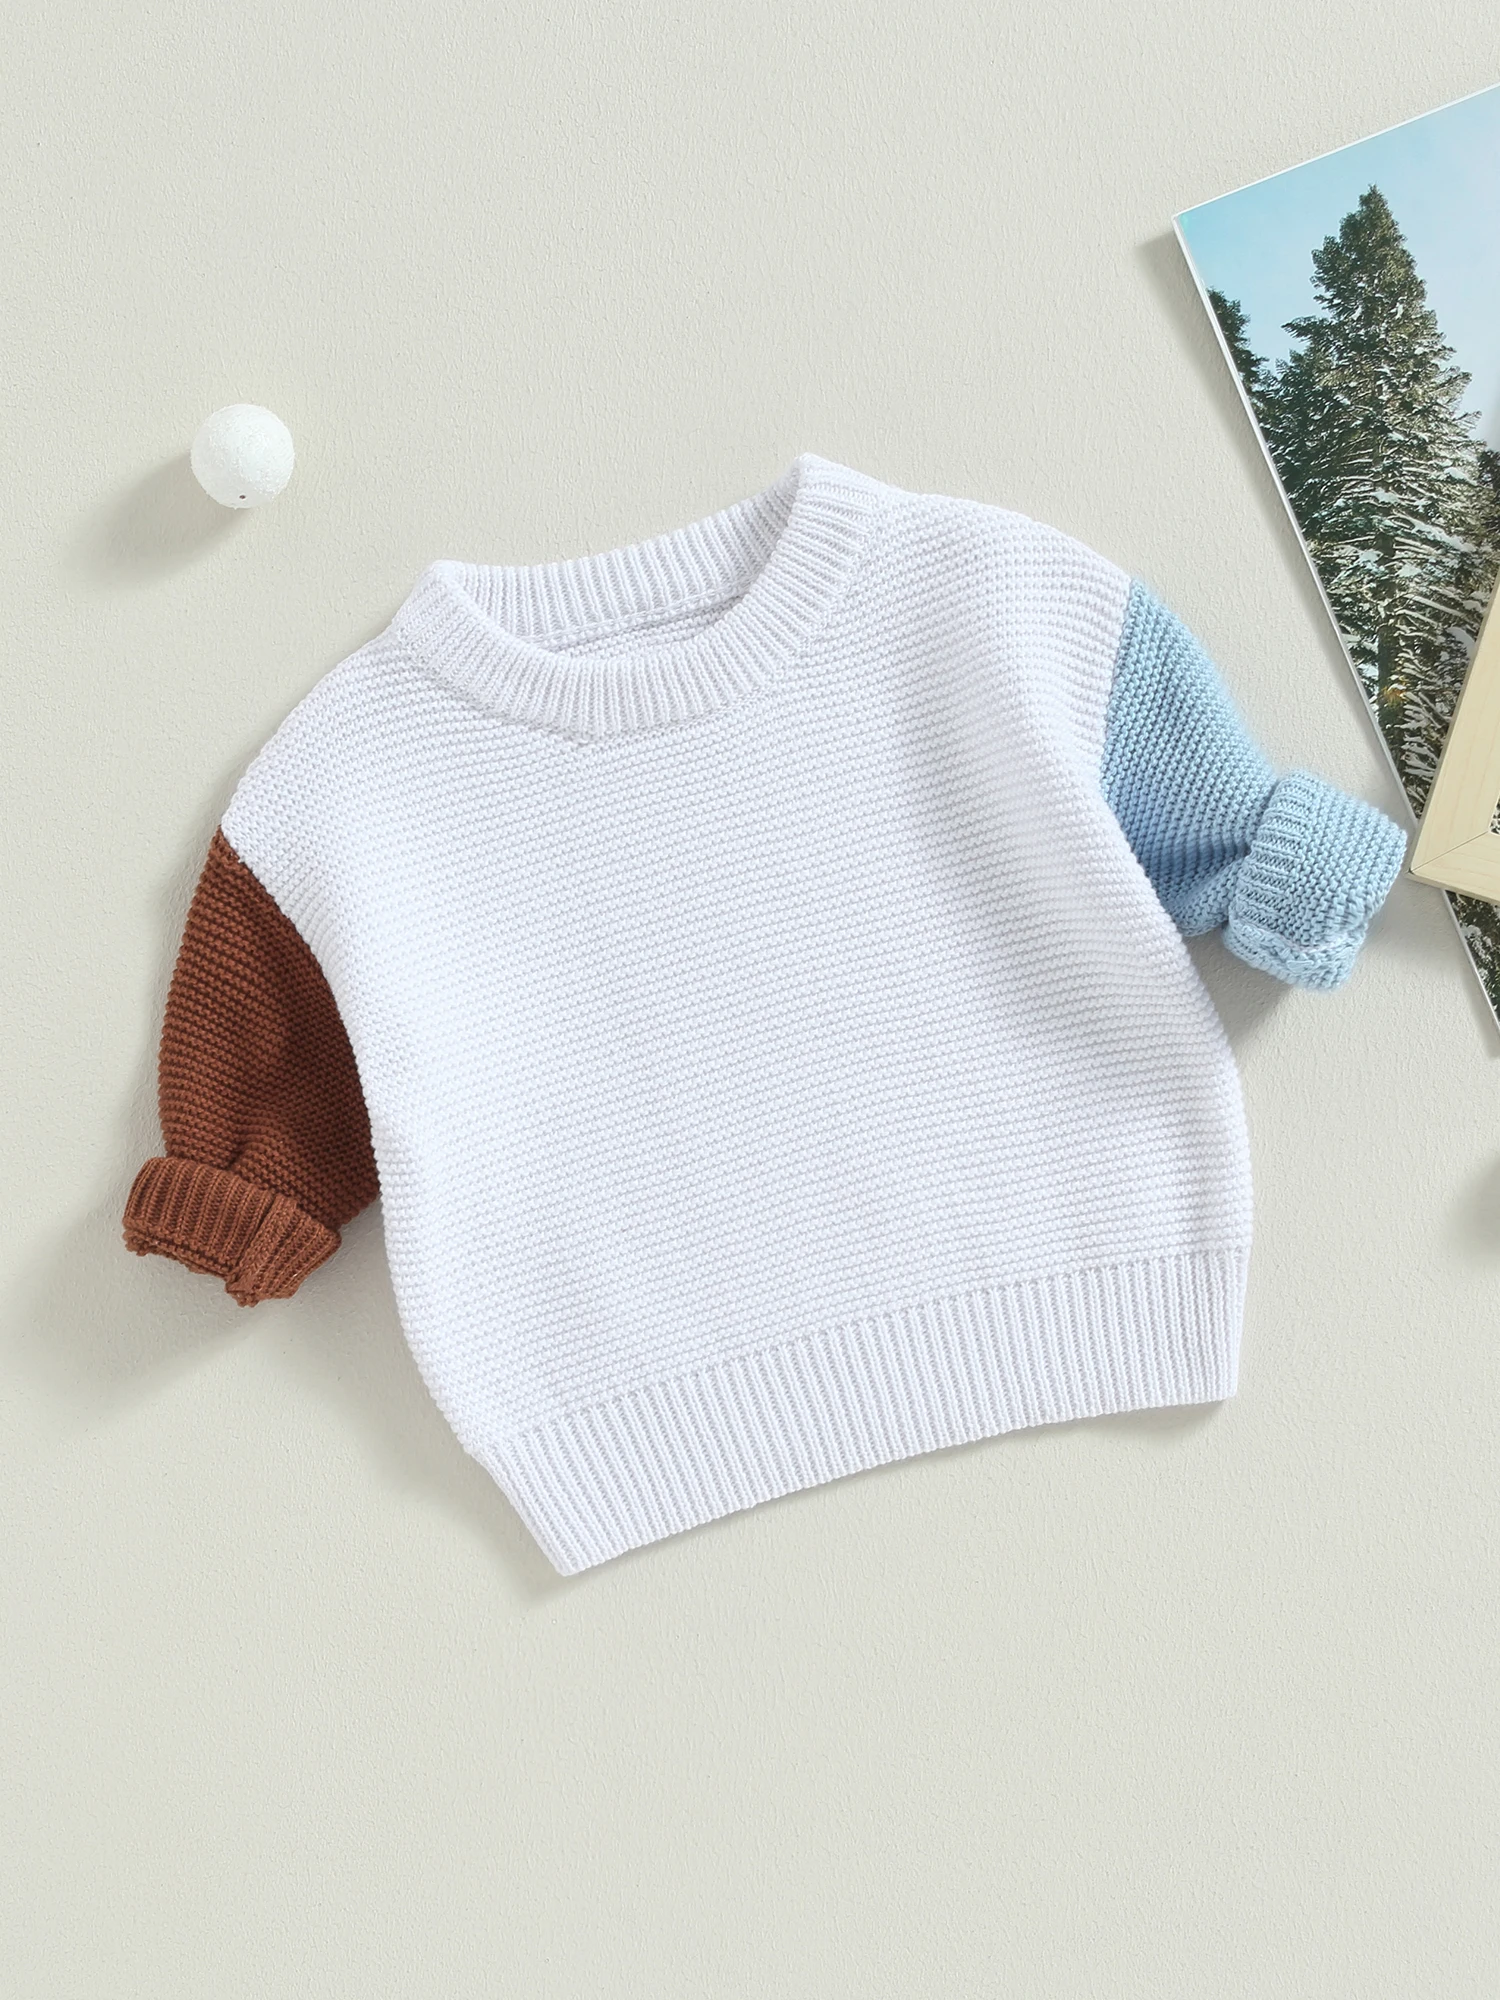 

Cute Toddler Winter Sweater Boys Girls Rib Knit Pullover Soft Knitwear Autumn Outfit Warm Unisex Baby Jumper Top